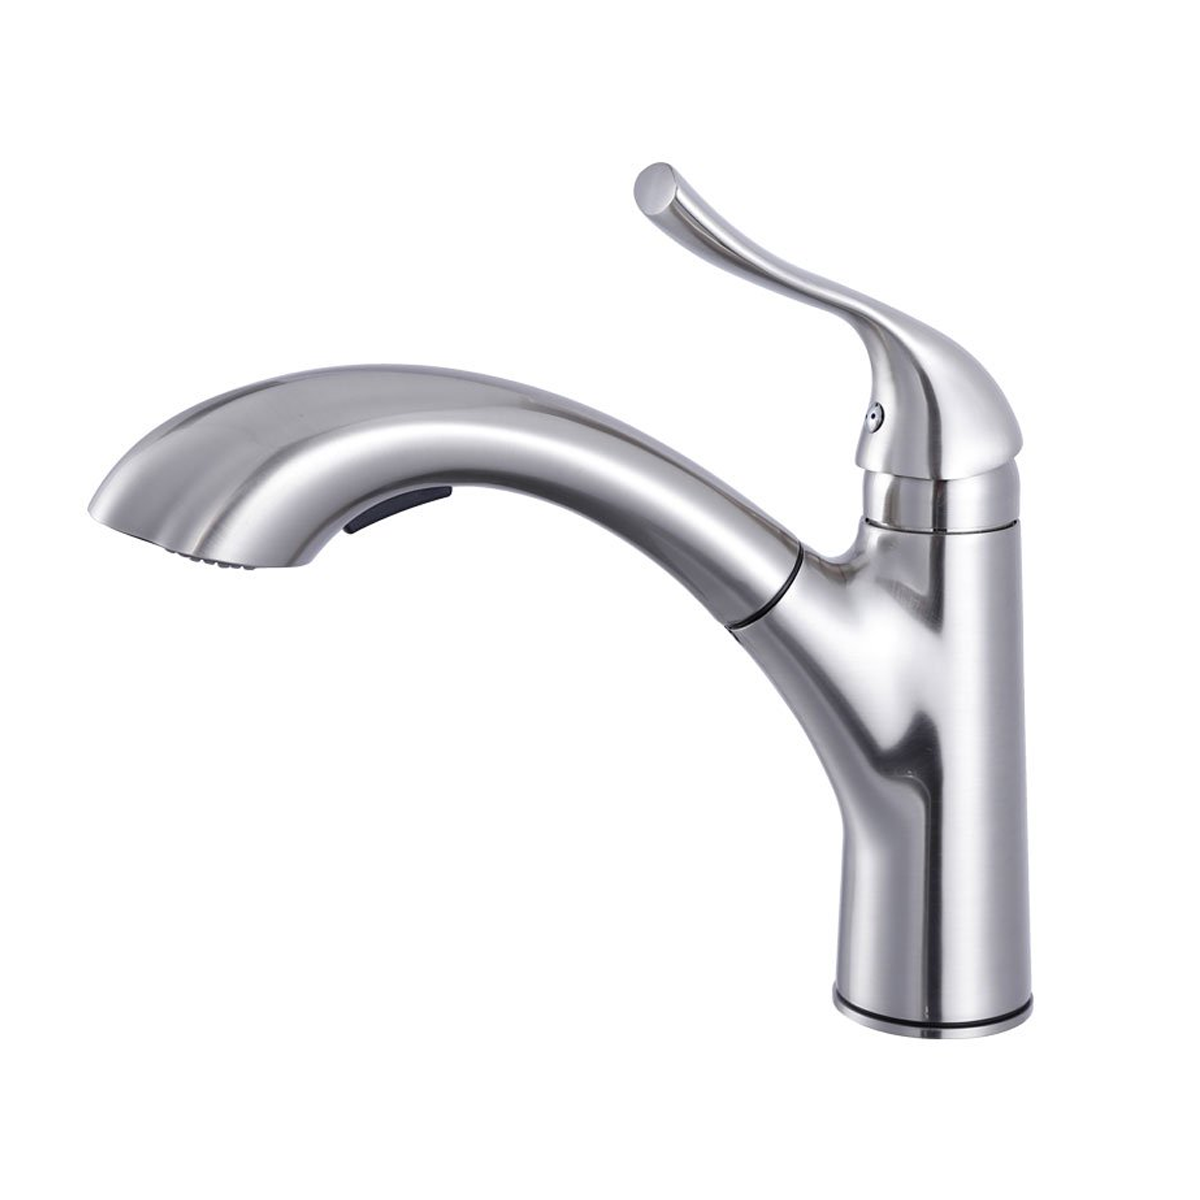 Pelican Int'l Fountain Series PL-8222 Single Hole Pull Out Kitchen Faucet In Brushed Nickel